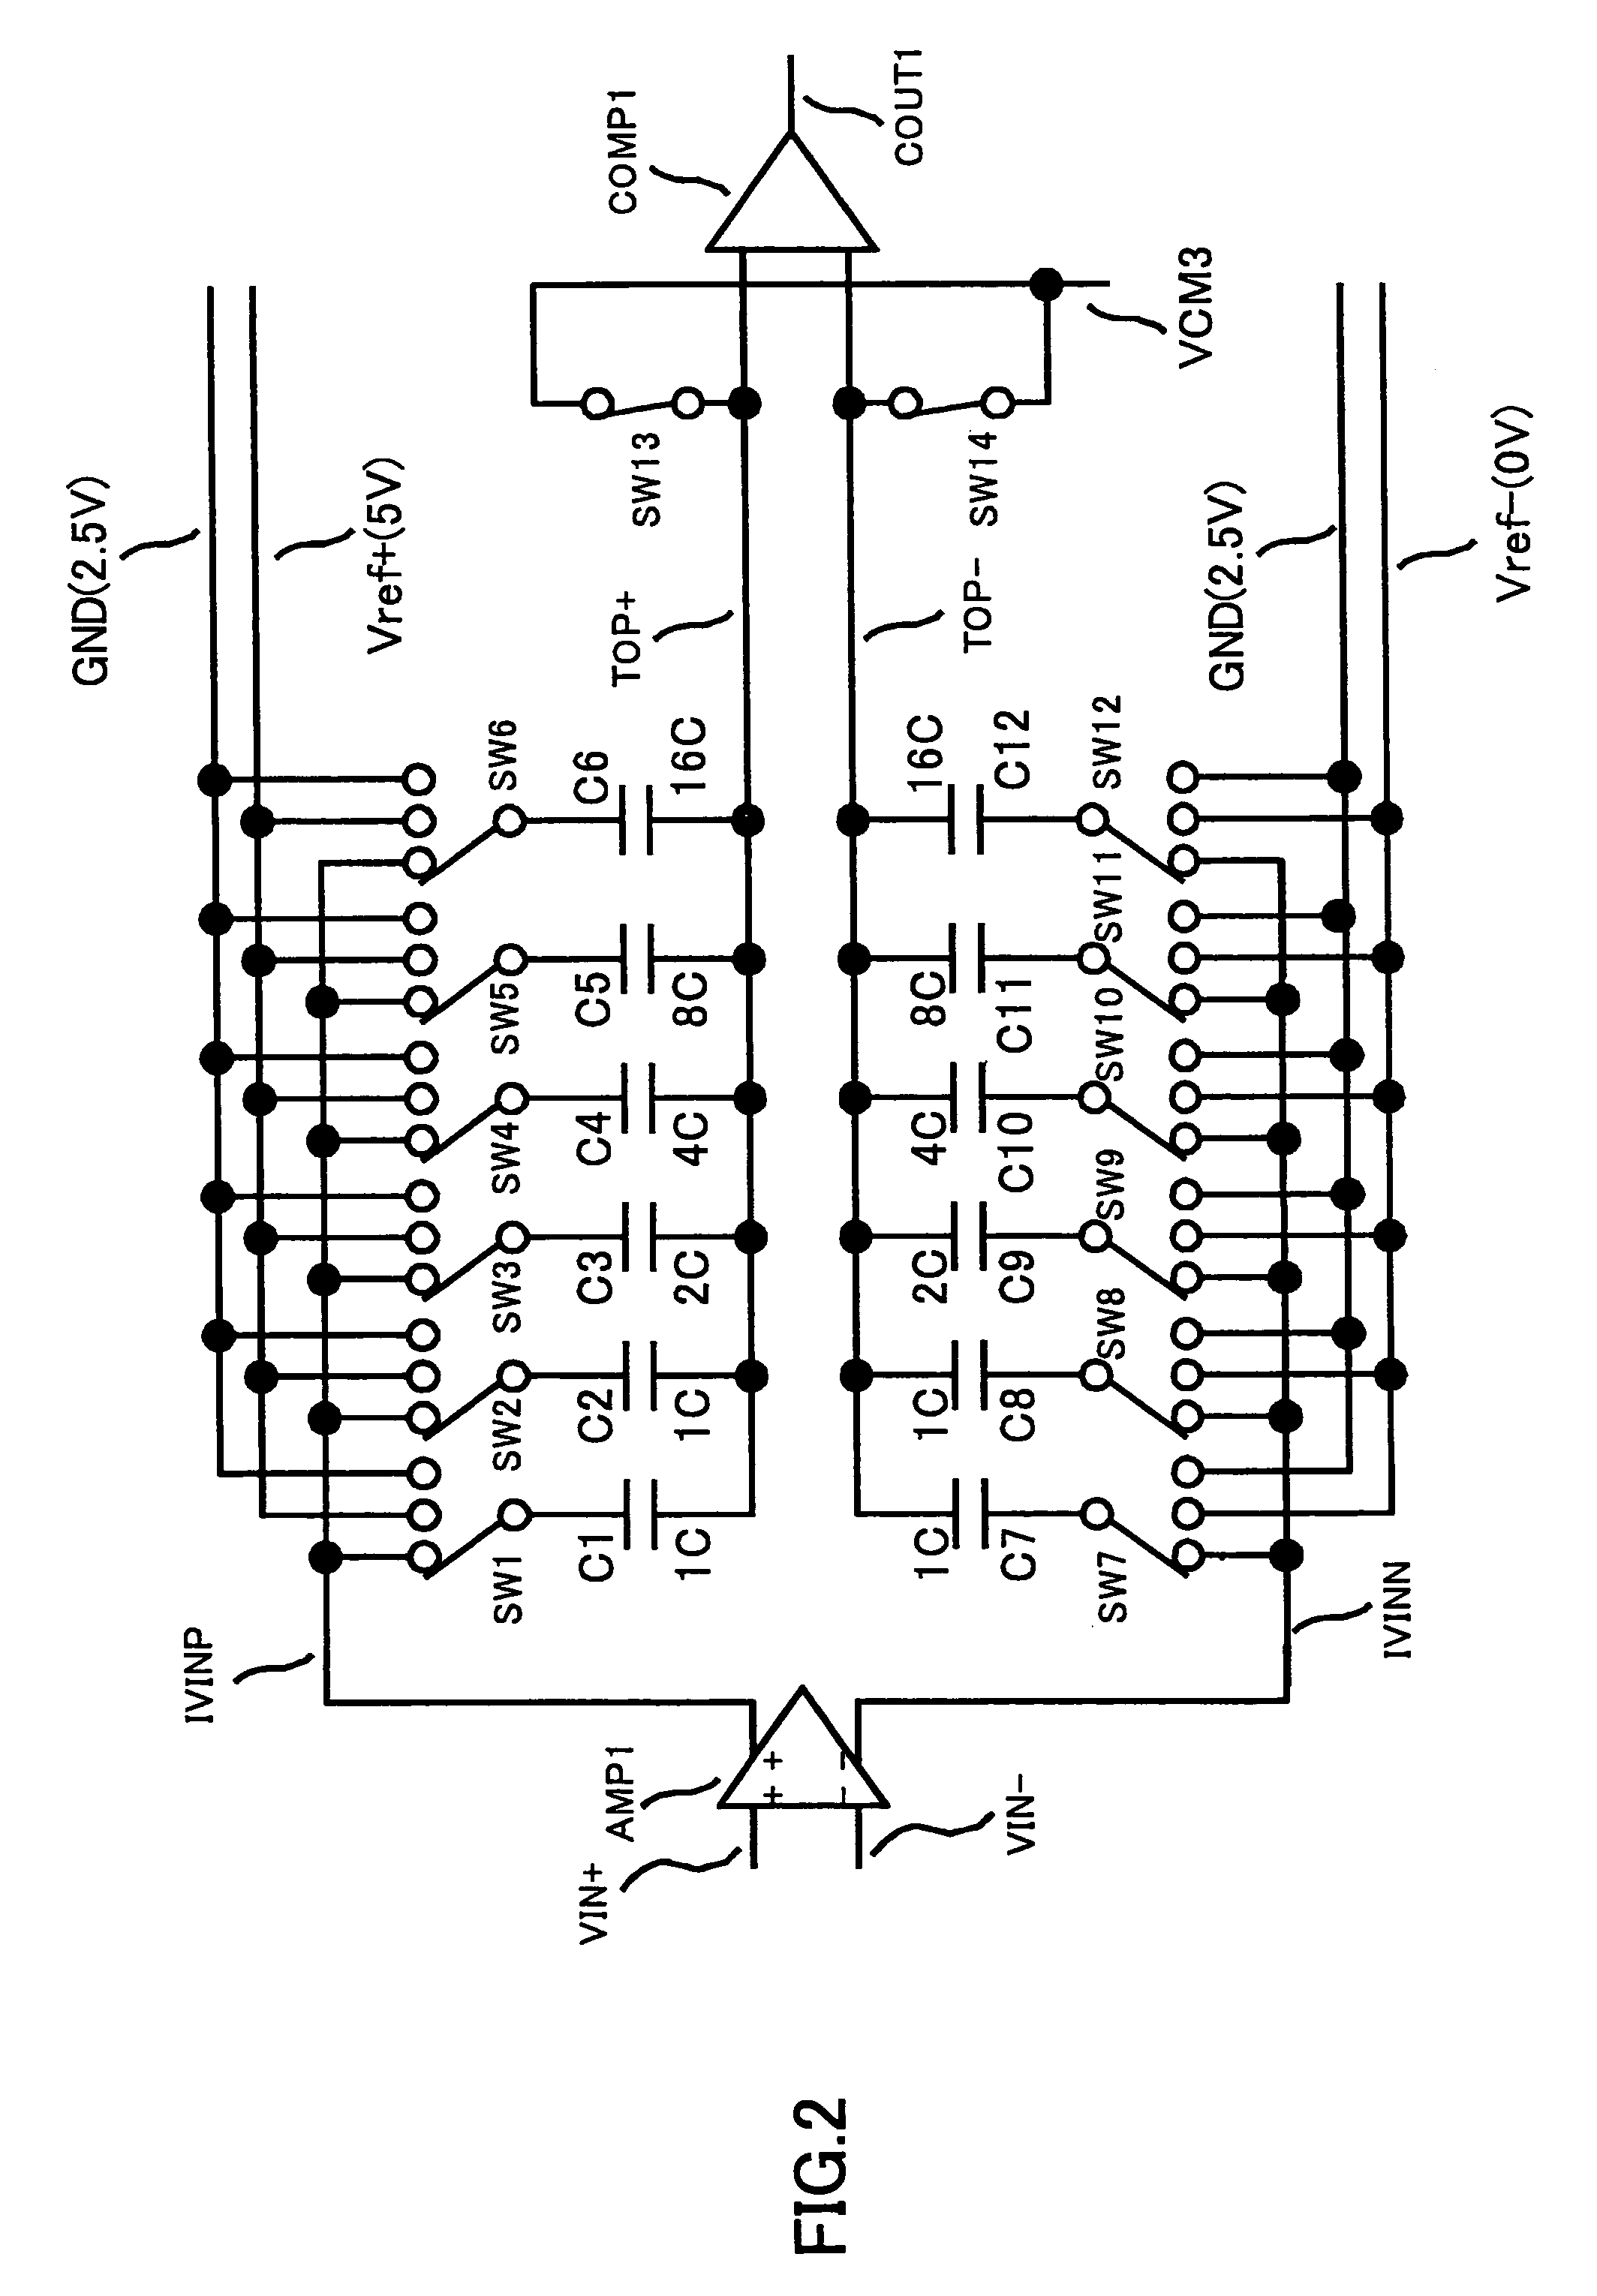 Successive approximation A/D converter provided with a sample-hold amplifier